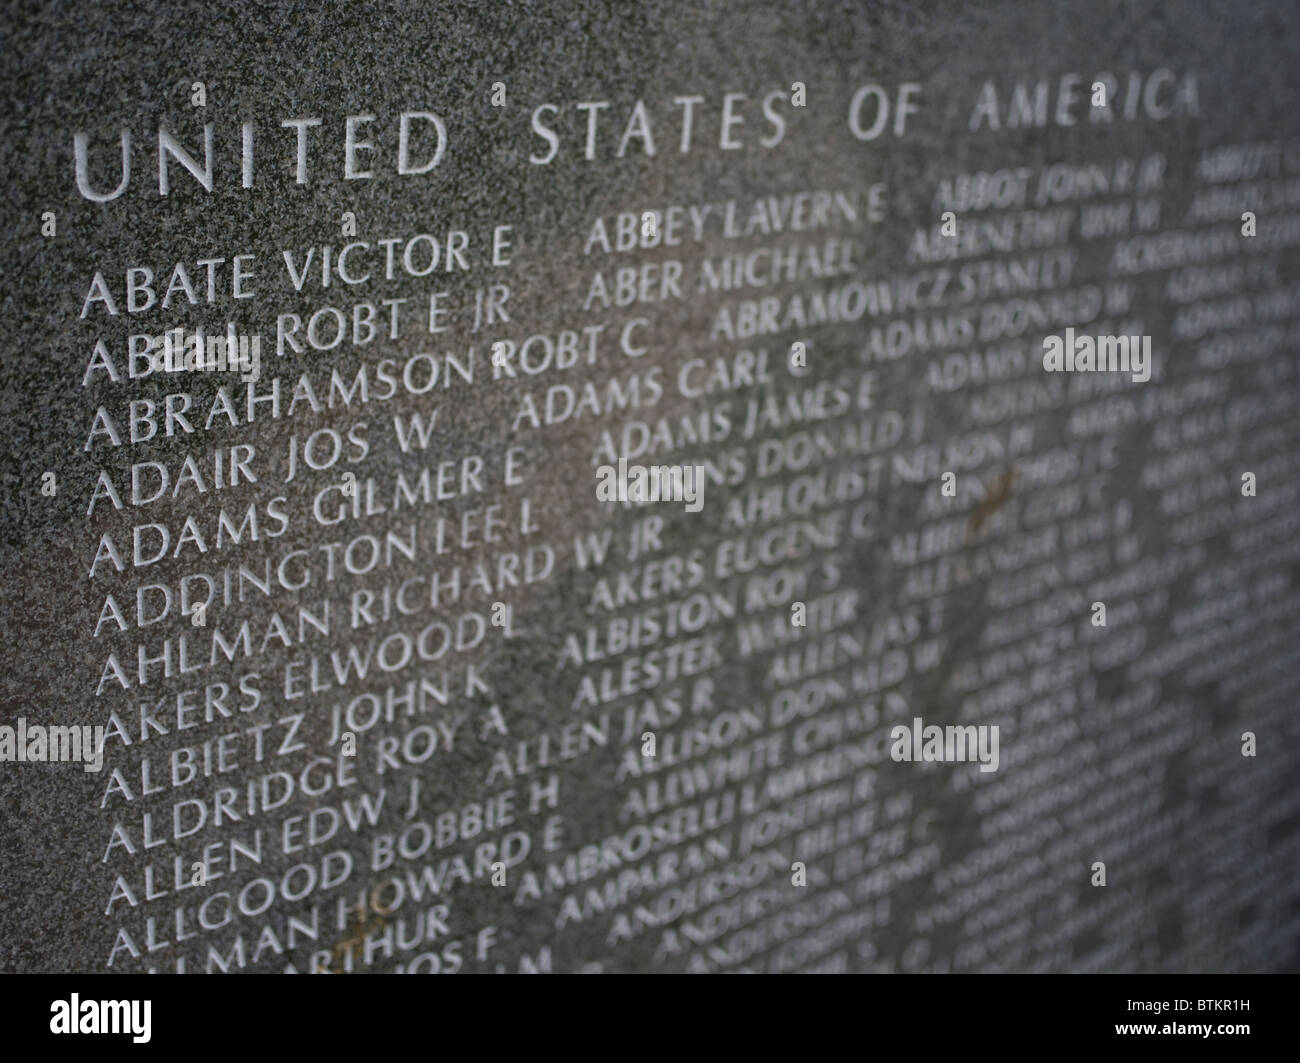 Cornerstone of peace - Granite wall with the names of those killed  at Peace Memorial Park, Okinawa, Japan. Stock Photo